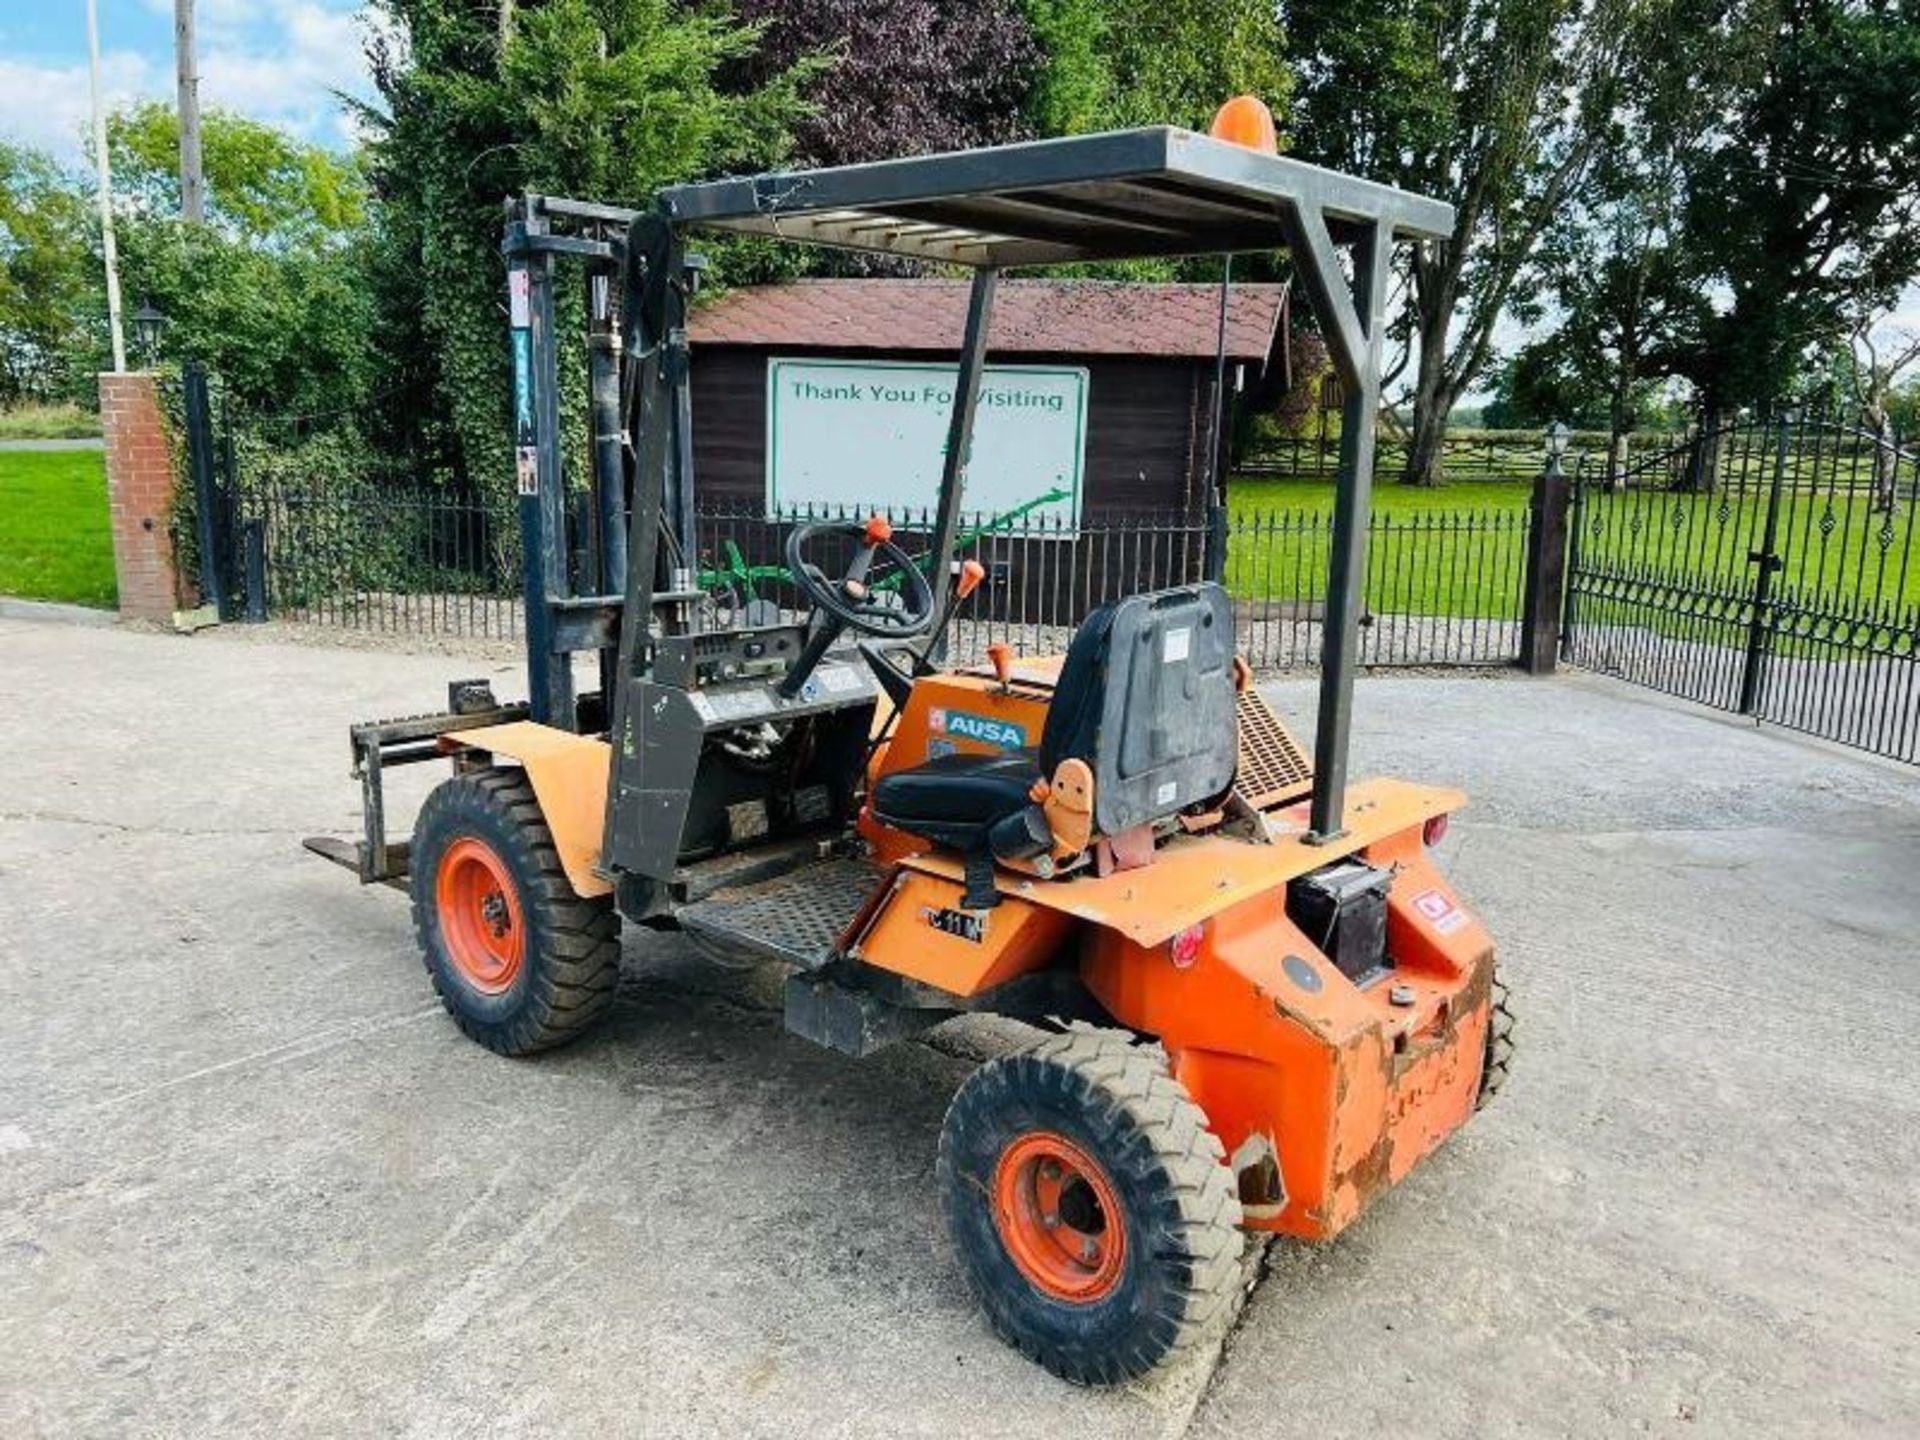 AUSA C11M ROUGH TERRIAN FORKLIFT * YEAR 2015 * C/W SIDE SHIFT - Image 13 of 13